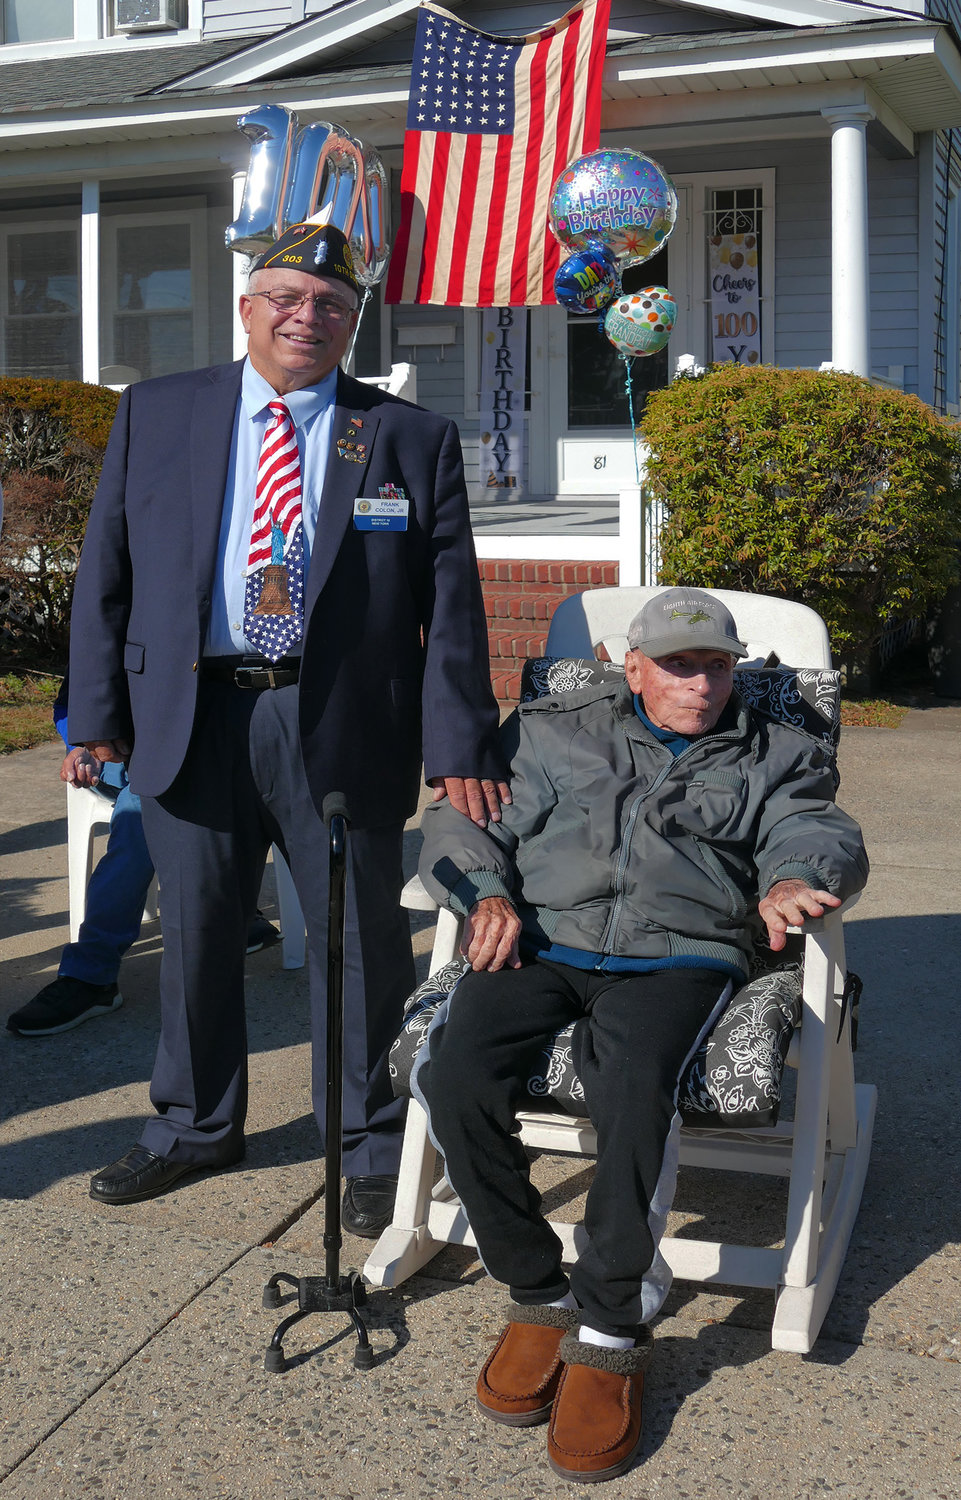 American Legion Post 303 Commander Frank Colon with his friend and neighbor Herb Rosenberg.